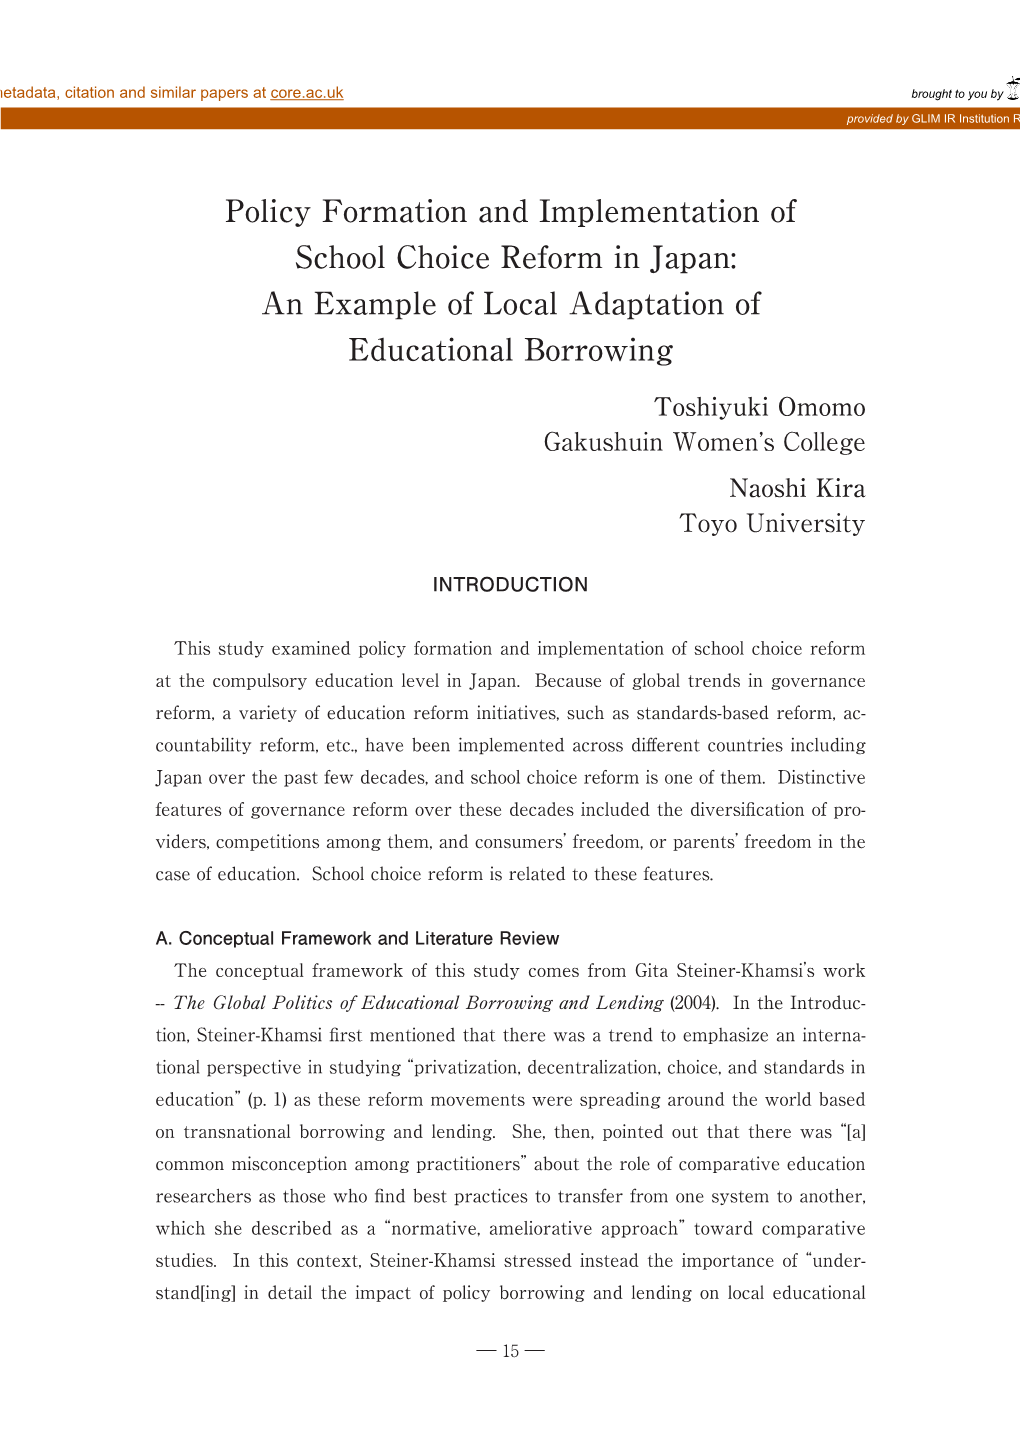 Policy Formation and Implementation of School Choice Reform in Japan: an Example of Local Adaptation of Educational Borrowing